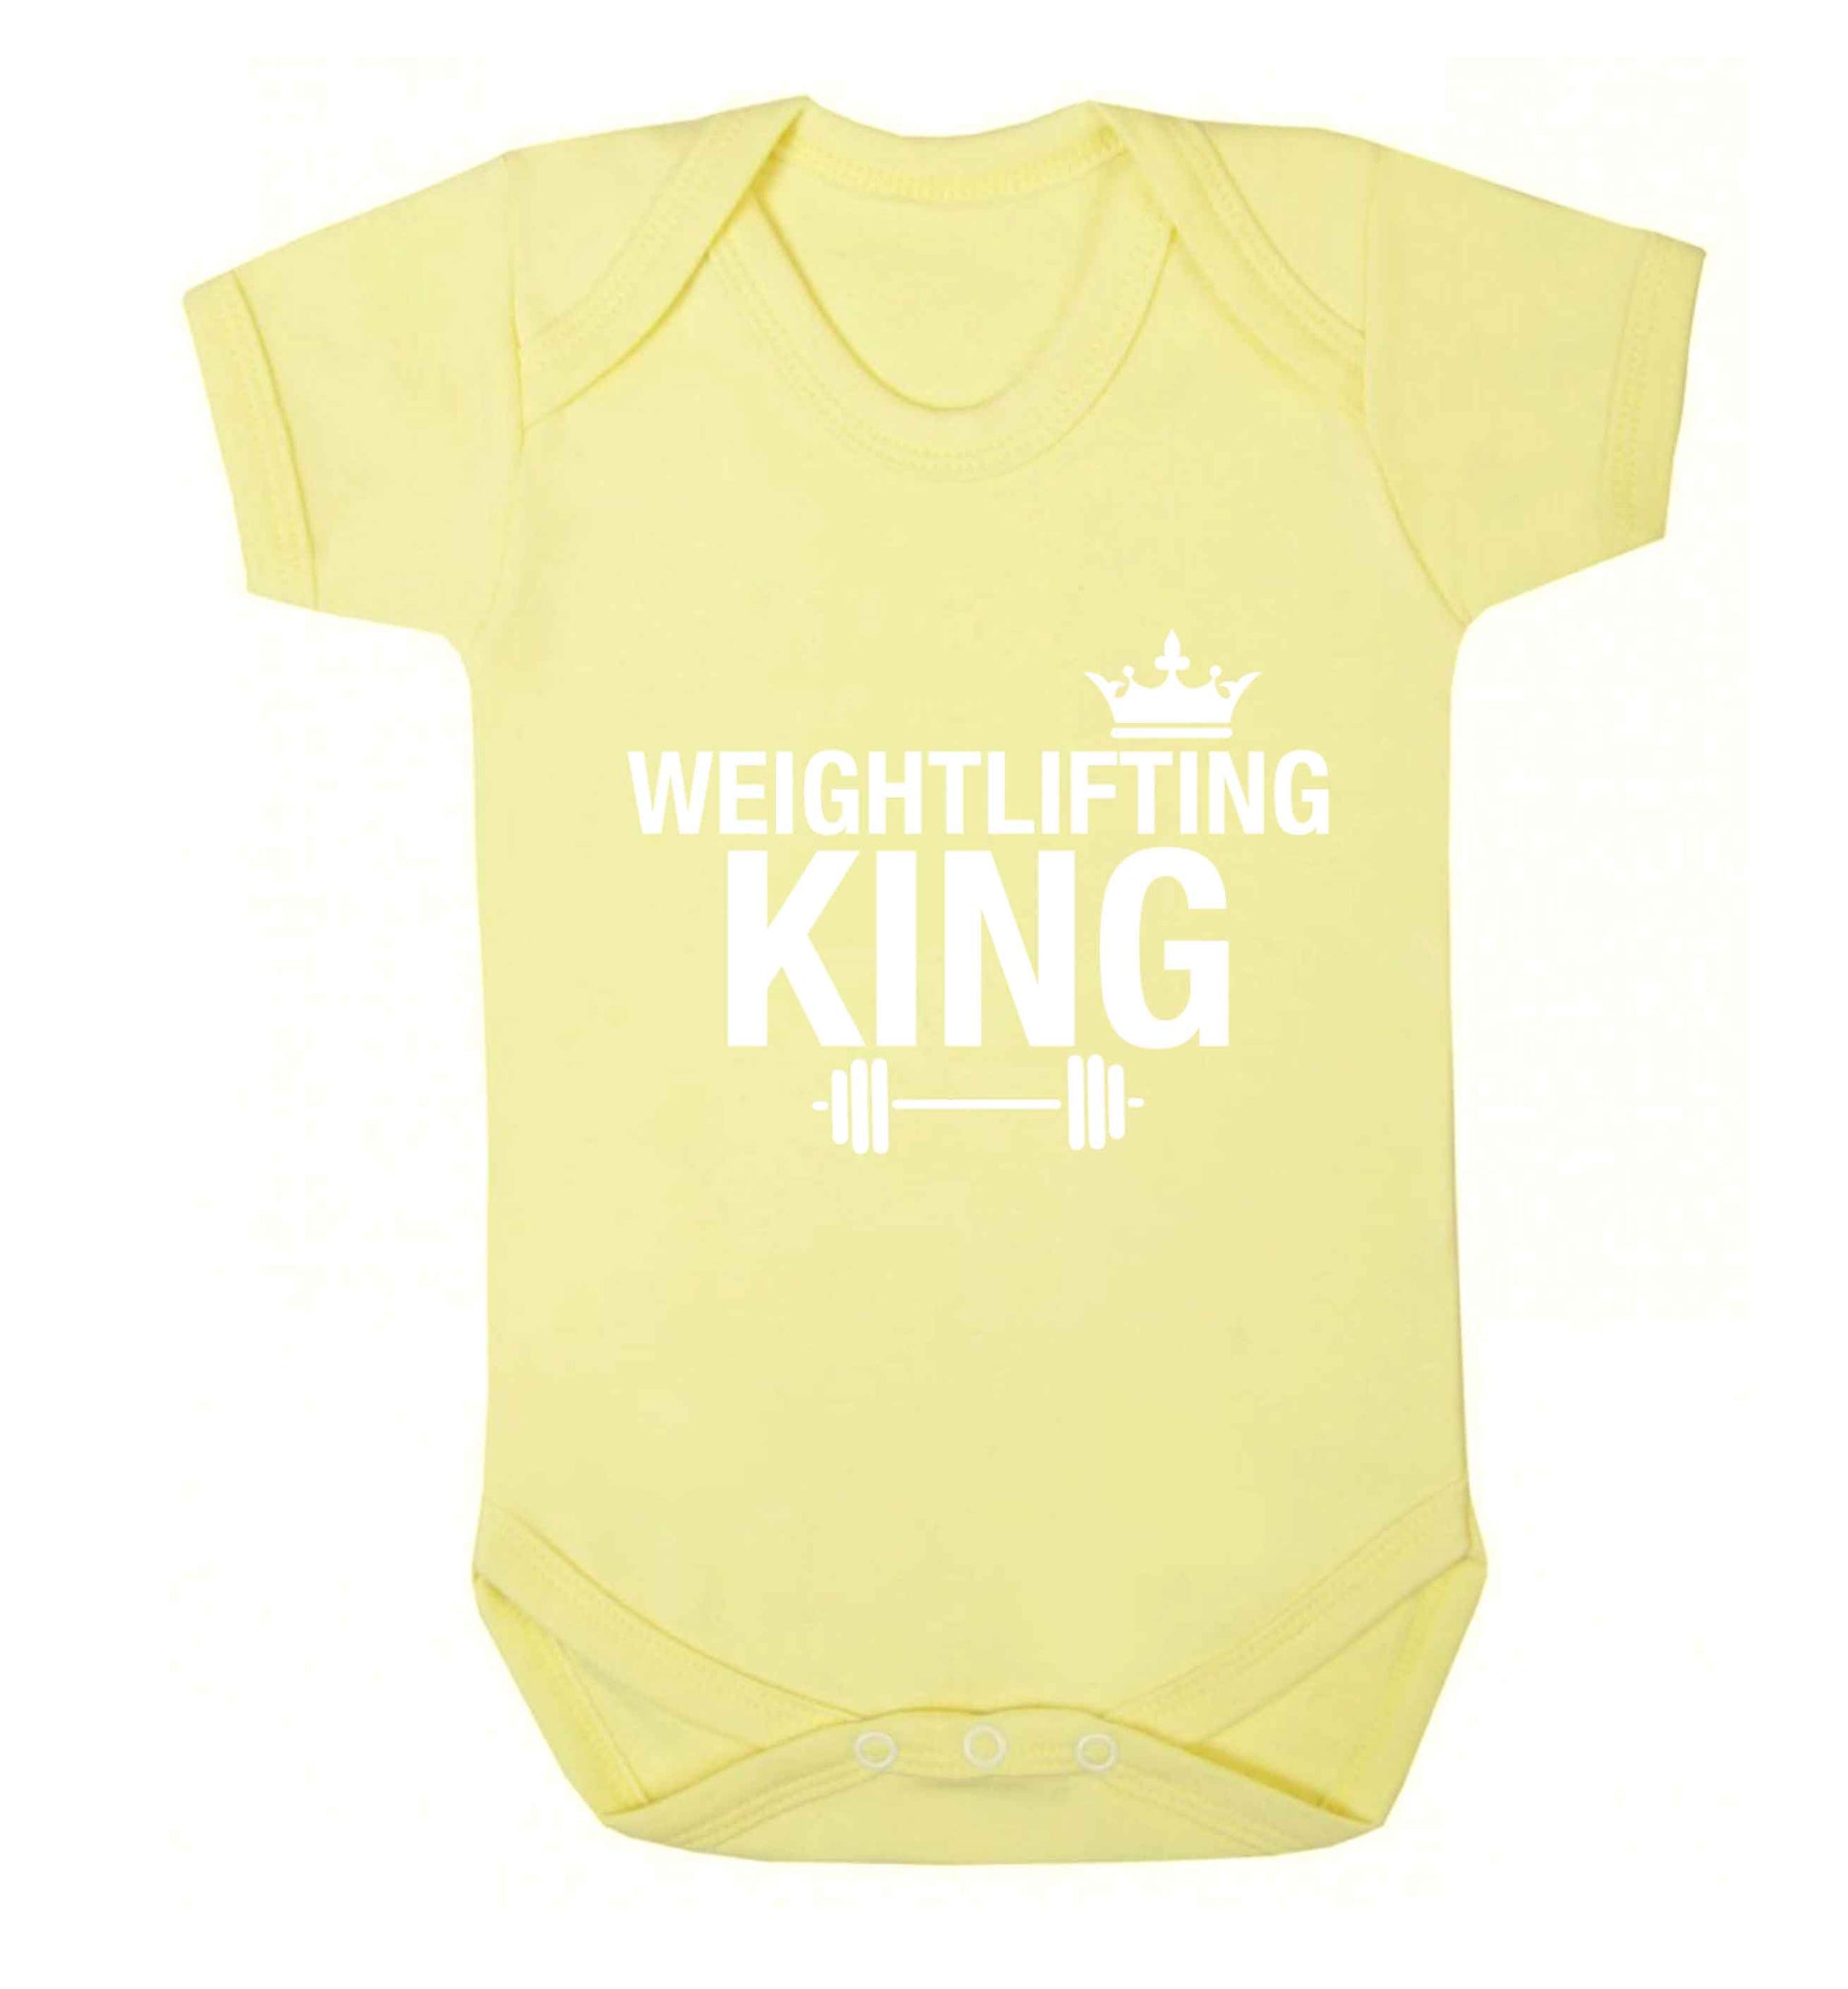 Weightlifting king Baby Vest pale yellow 18-24 months